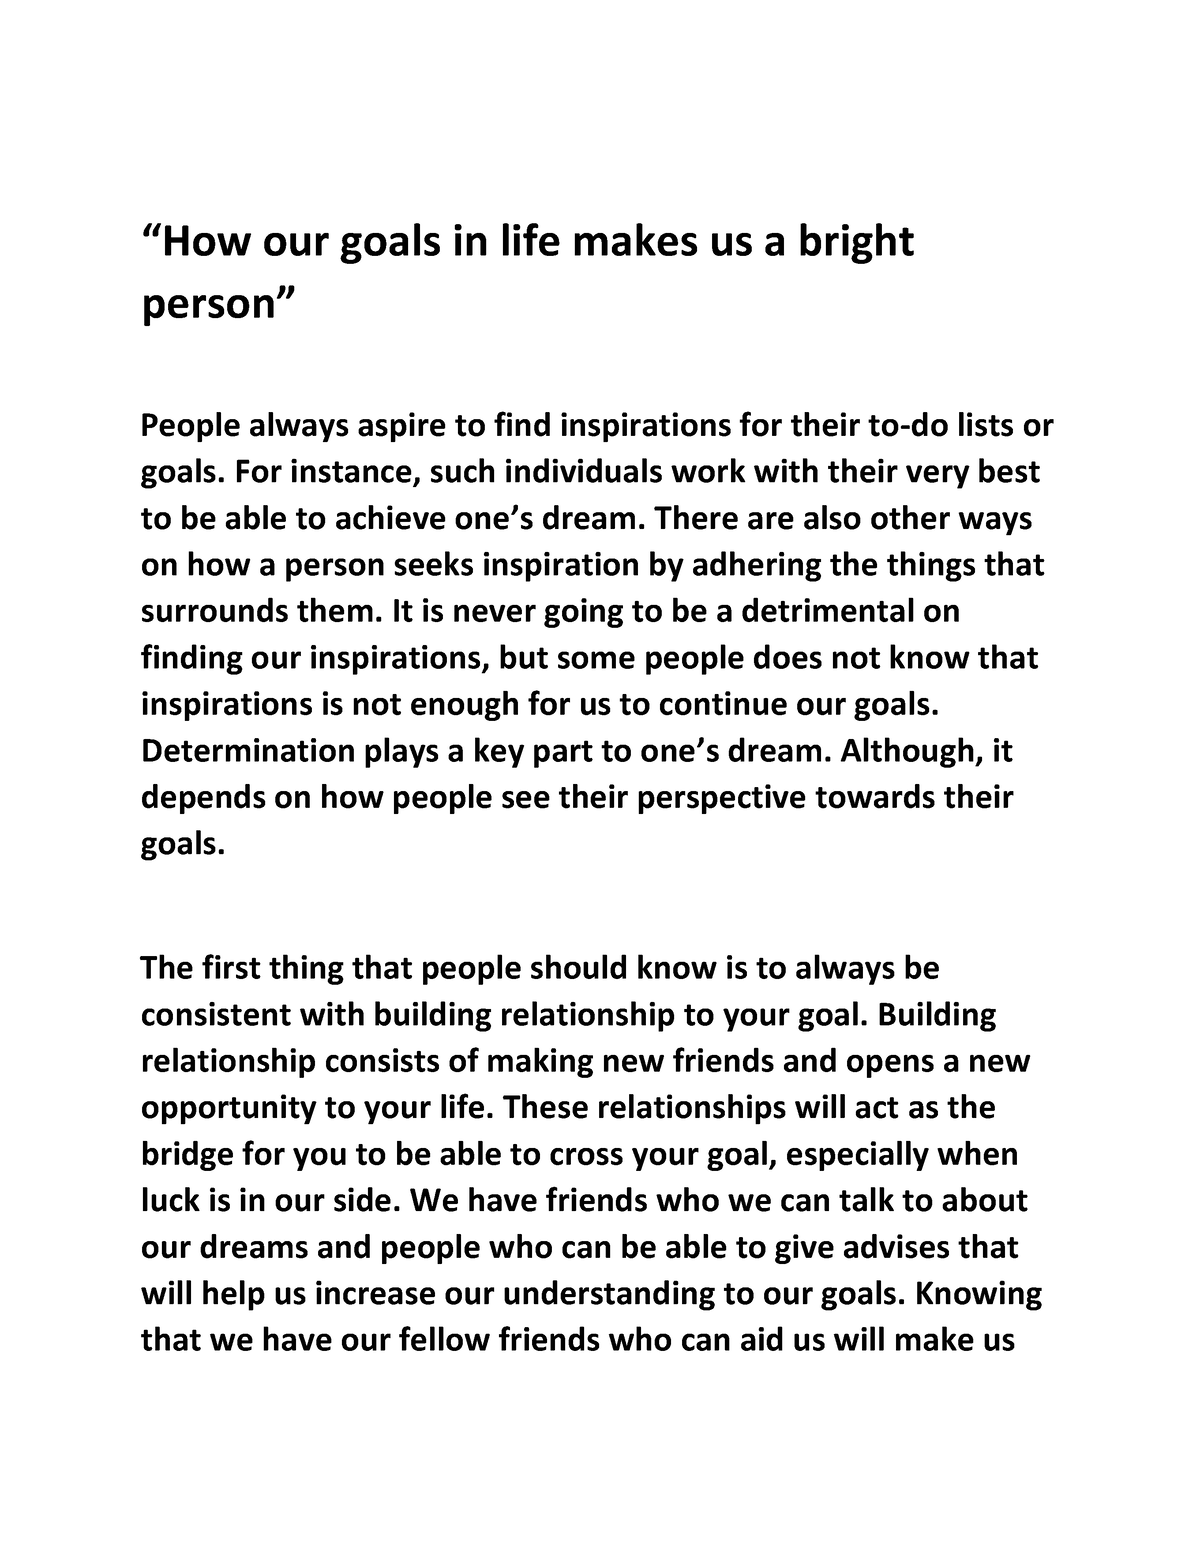 sample essay about goals in life